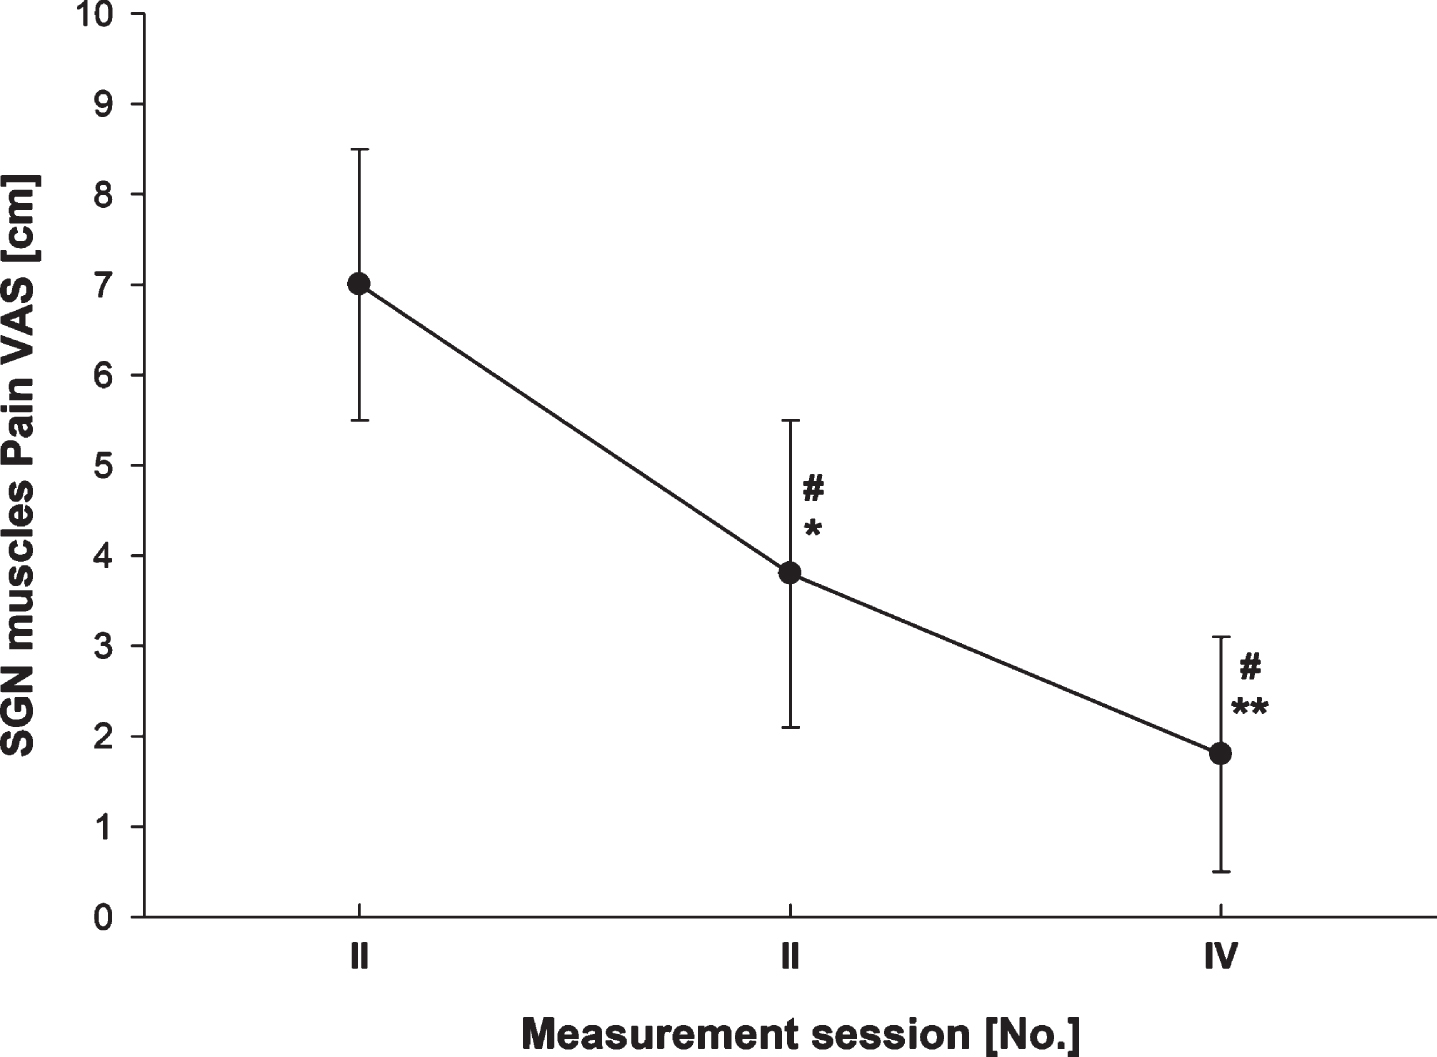 Shoulder girdle and neck (SGN) muscles pain felt by subject (assessed with VAS-visual analog scale score; [cm]) during therapeutic sessions. Data are expressed as mean (SD); # - statistically significant difference (p≤0.001) compared to the post-1’st therapy measurement session value in the post hoc analysis; ** - statistically significant difference (p≤0.001) compared to the post-4’th therapy measurement session value in the post hoc analysis.